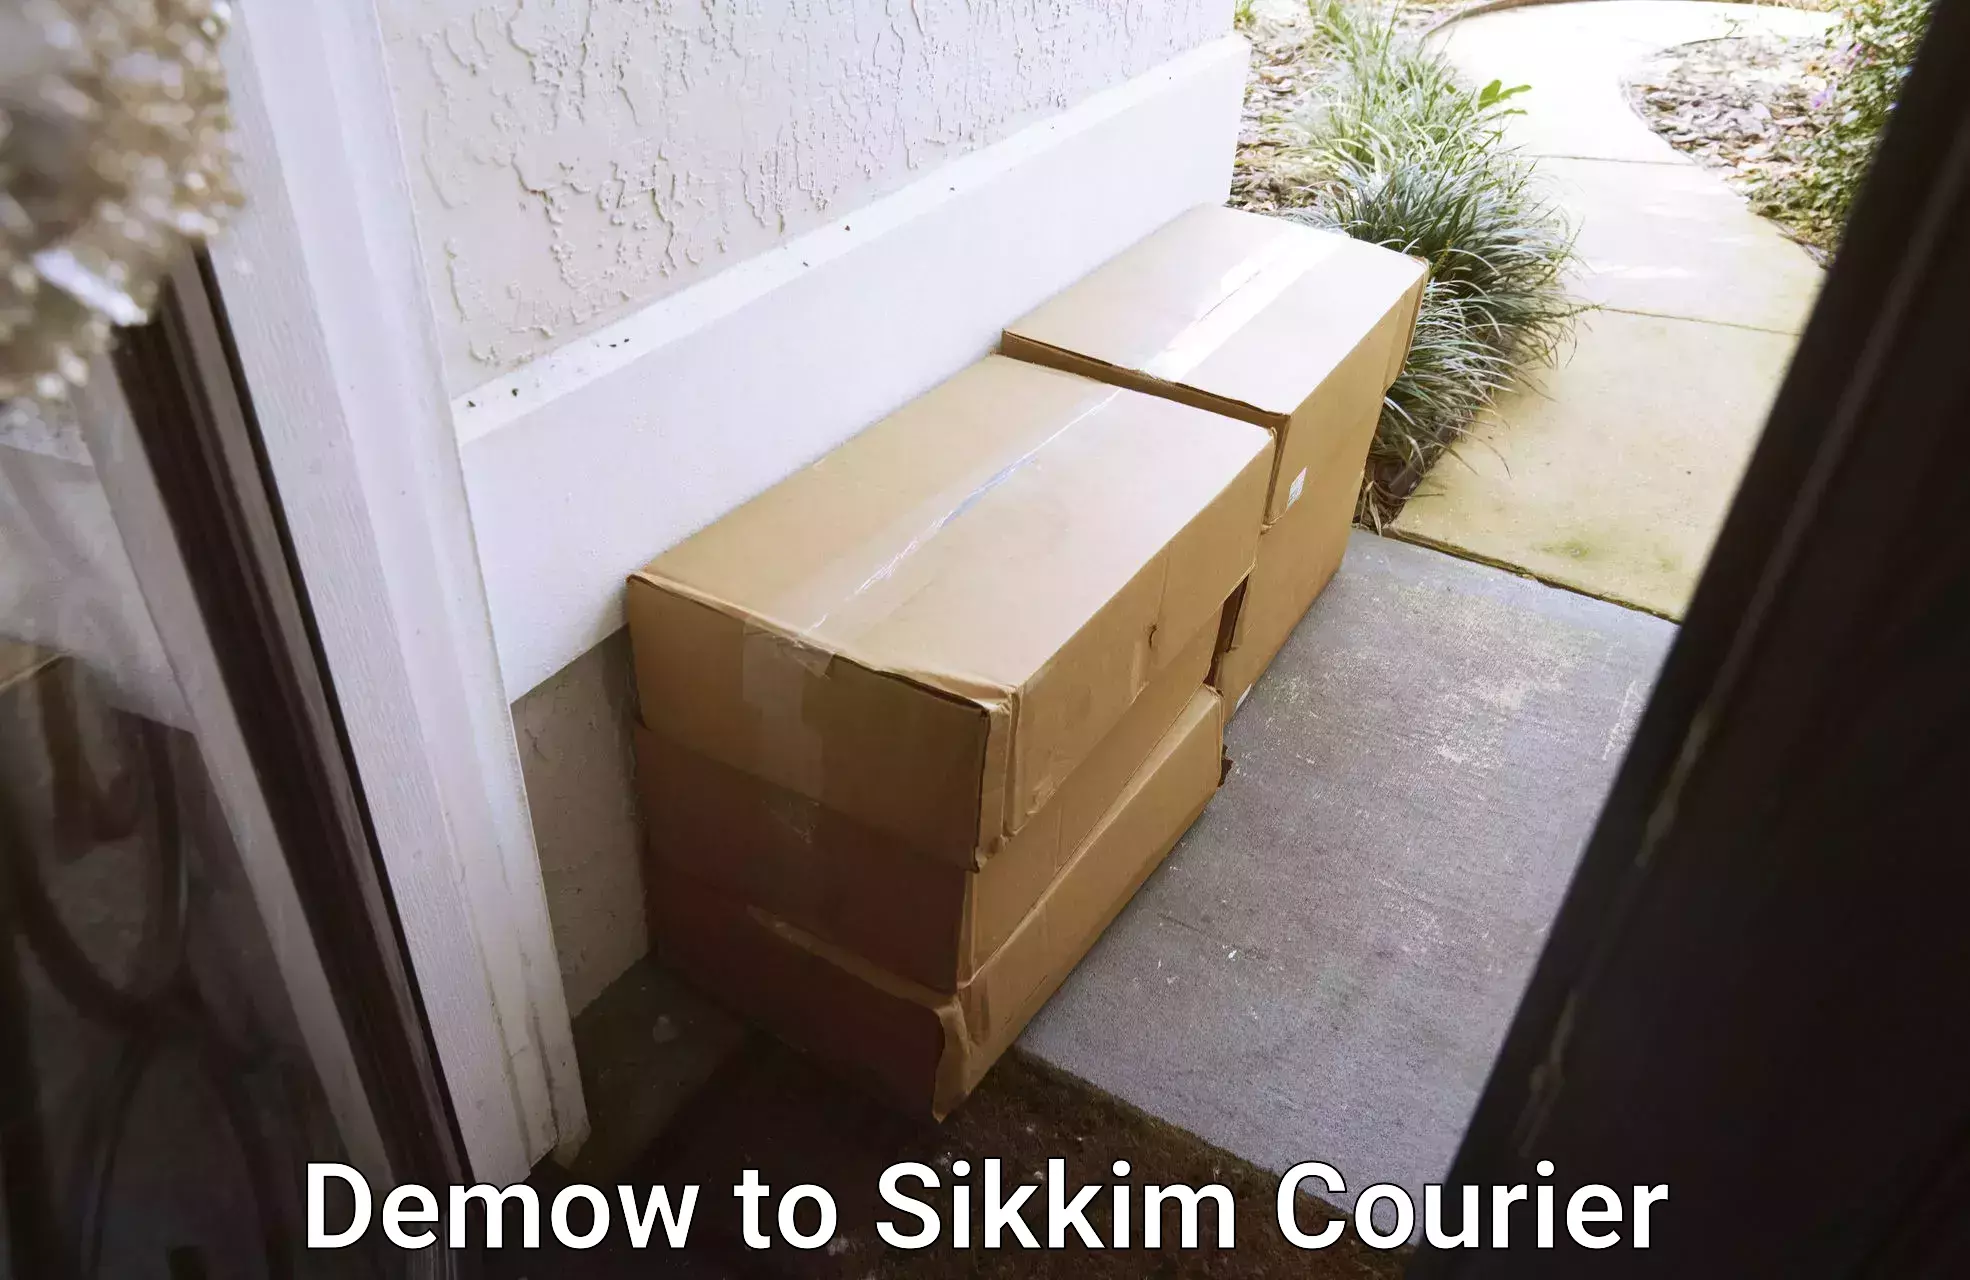 Weekend courier service in Demow to Sikkim